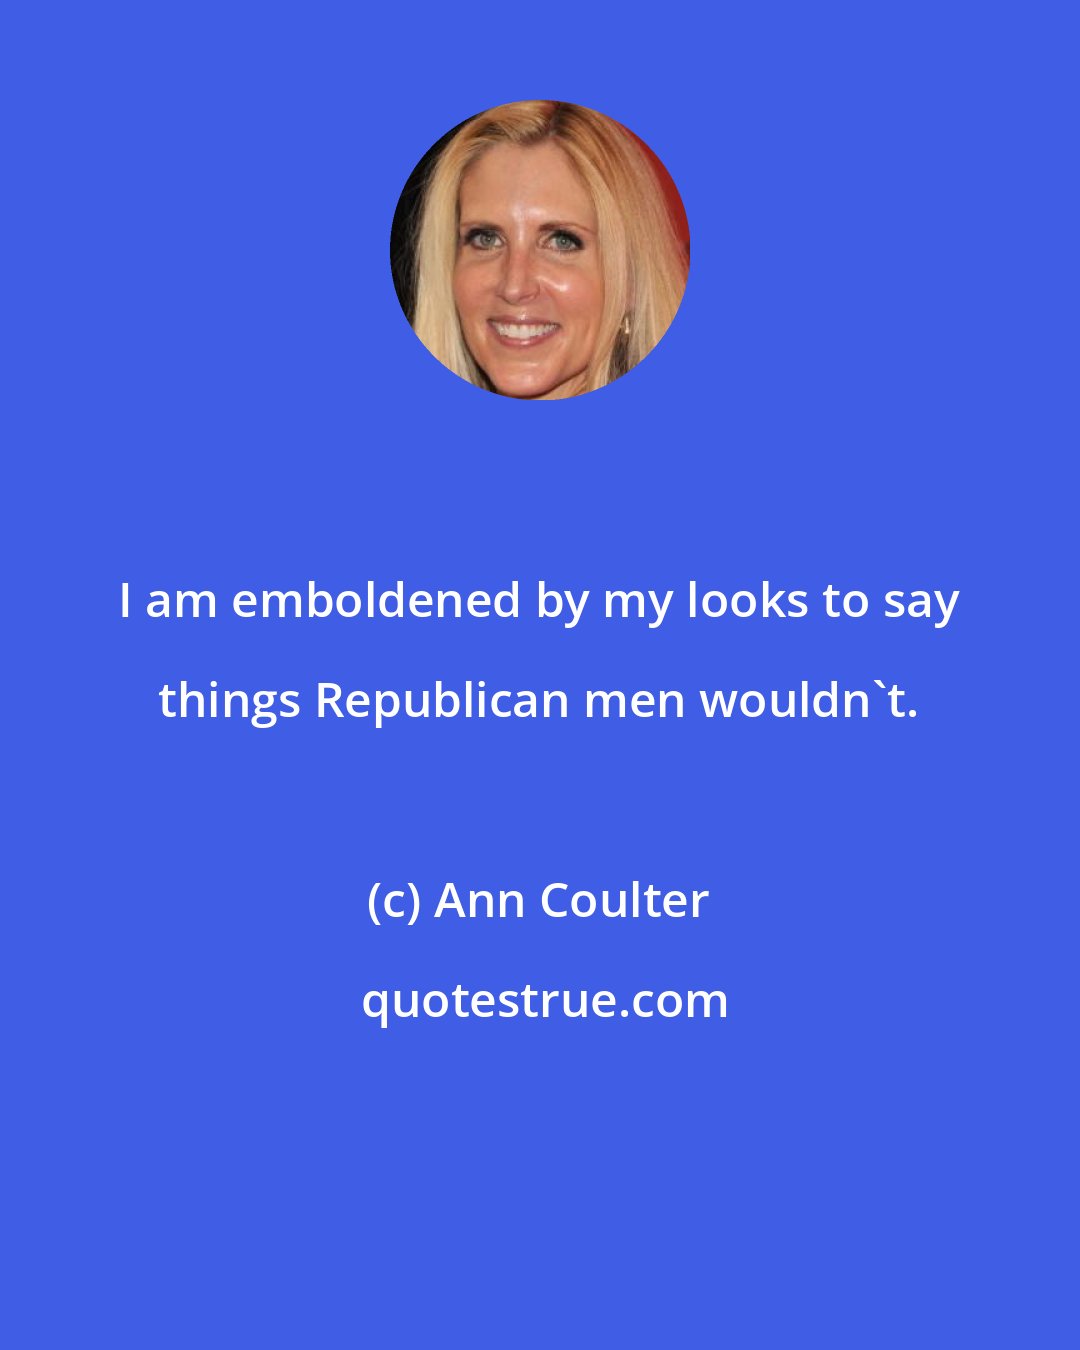 Ann Coulter: I am emboldened by my looks to say things Republican men wouldn't.